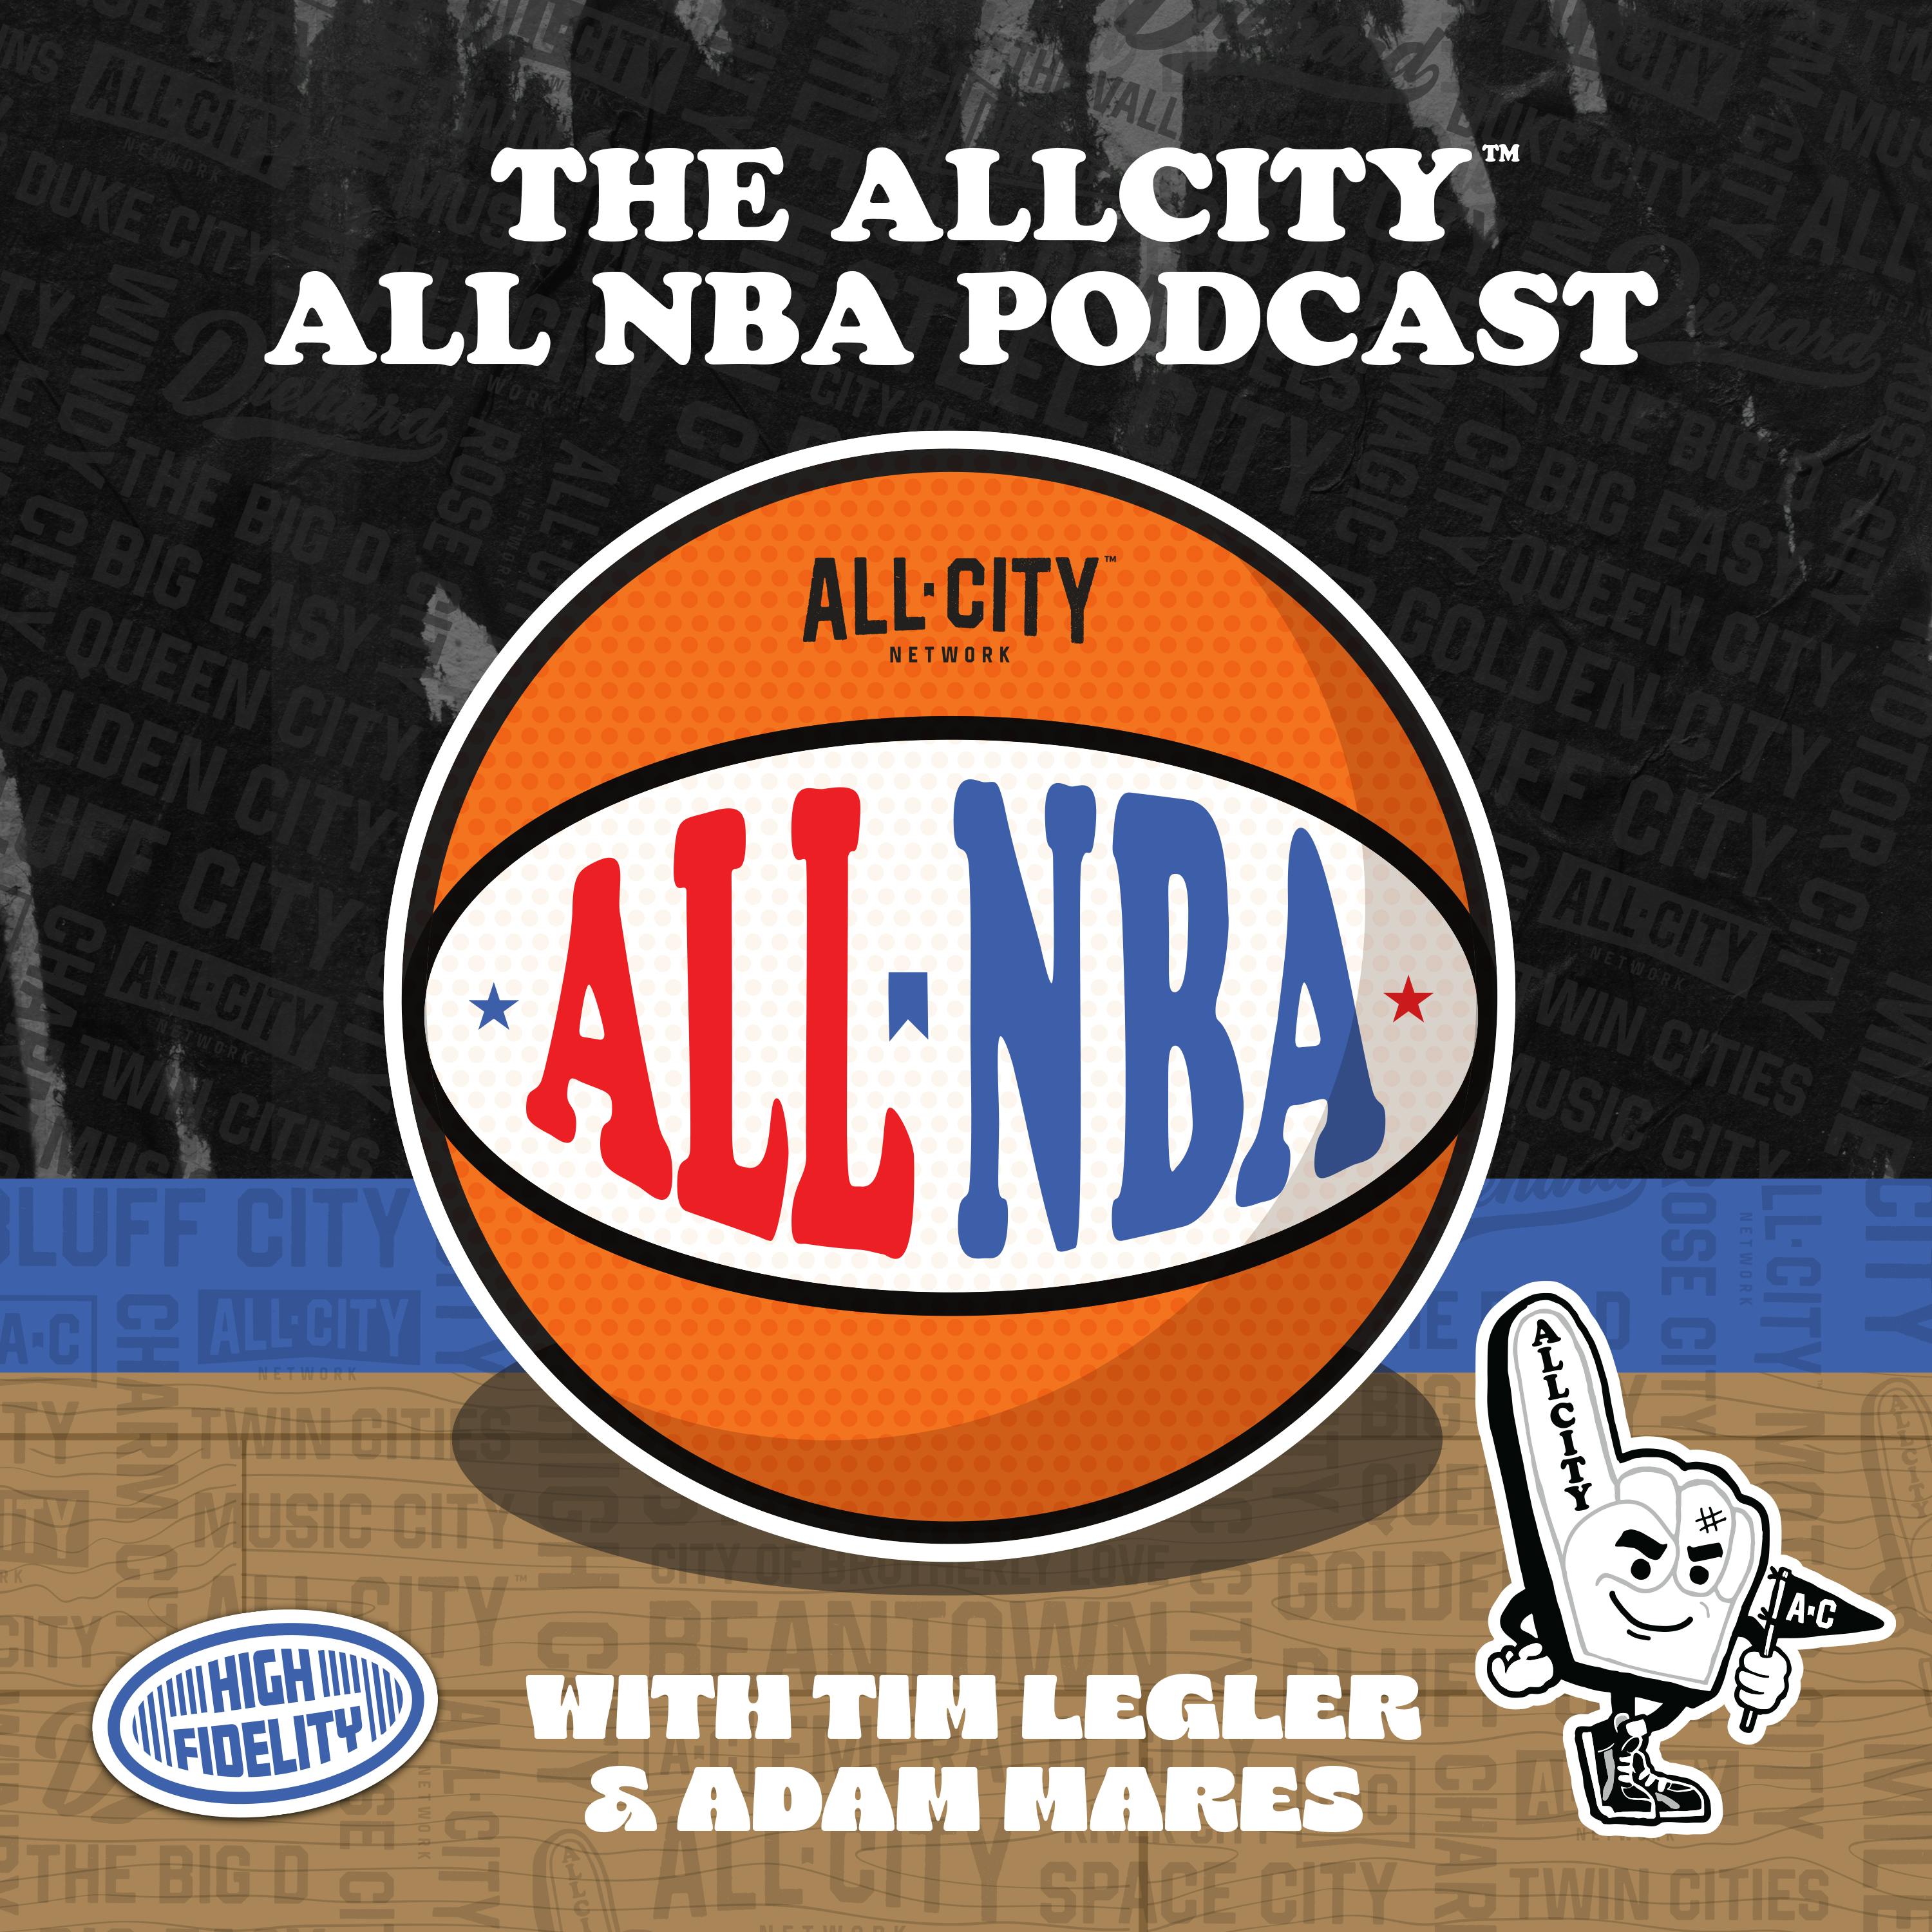 The ALL NBA Podcast: Who are the most trustworthy NBA players in the clutch?